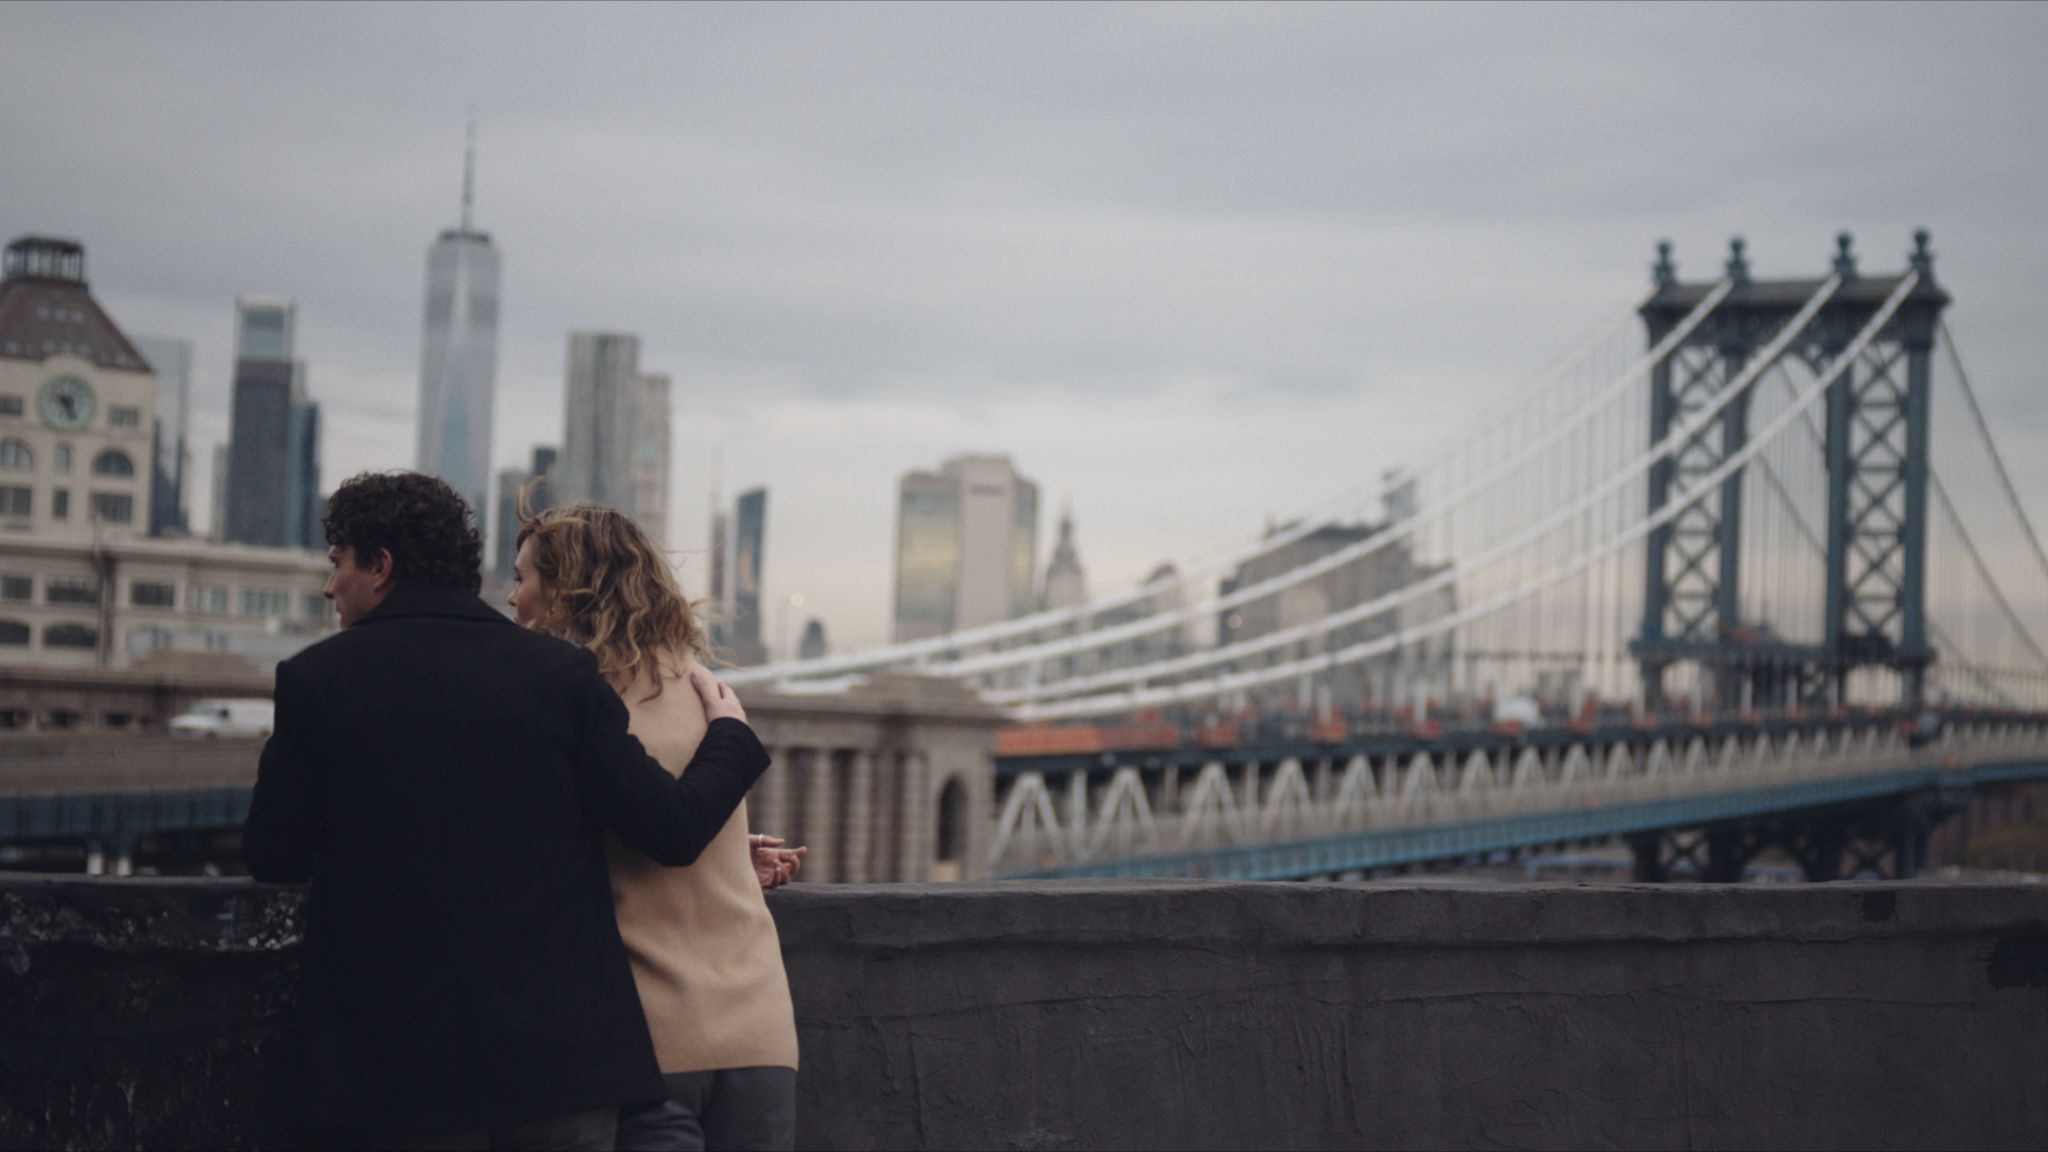 IU C&I Studios Page C&I Studios Blog The Rise of the Docuseries Are We in a Documentary Production Golden Age View from behind of man and woman on a bridge with the man's arms around the woman's shoulder looking out at another bridge in New York City